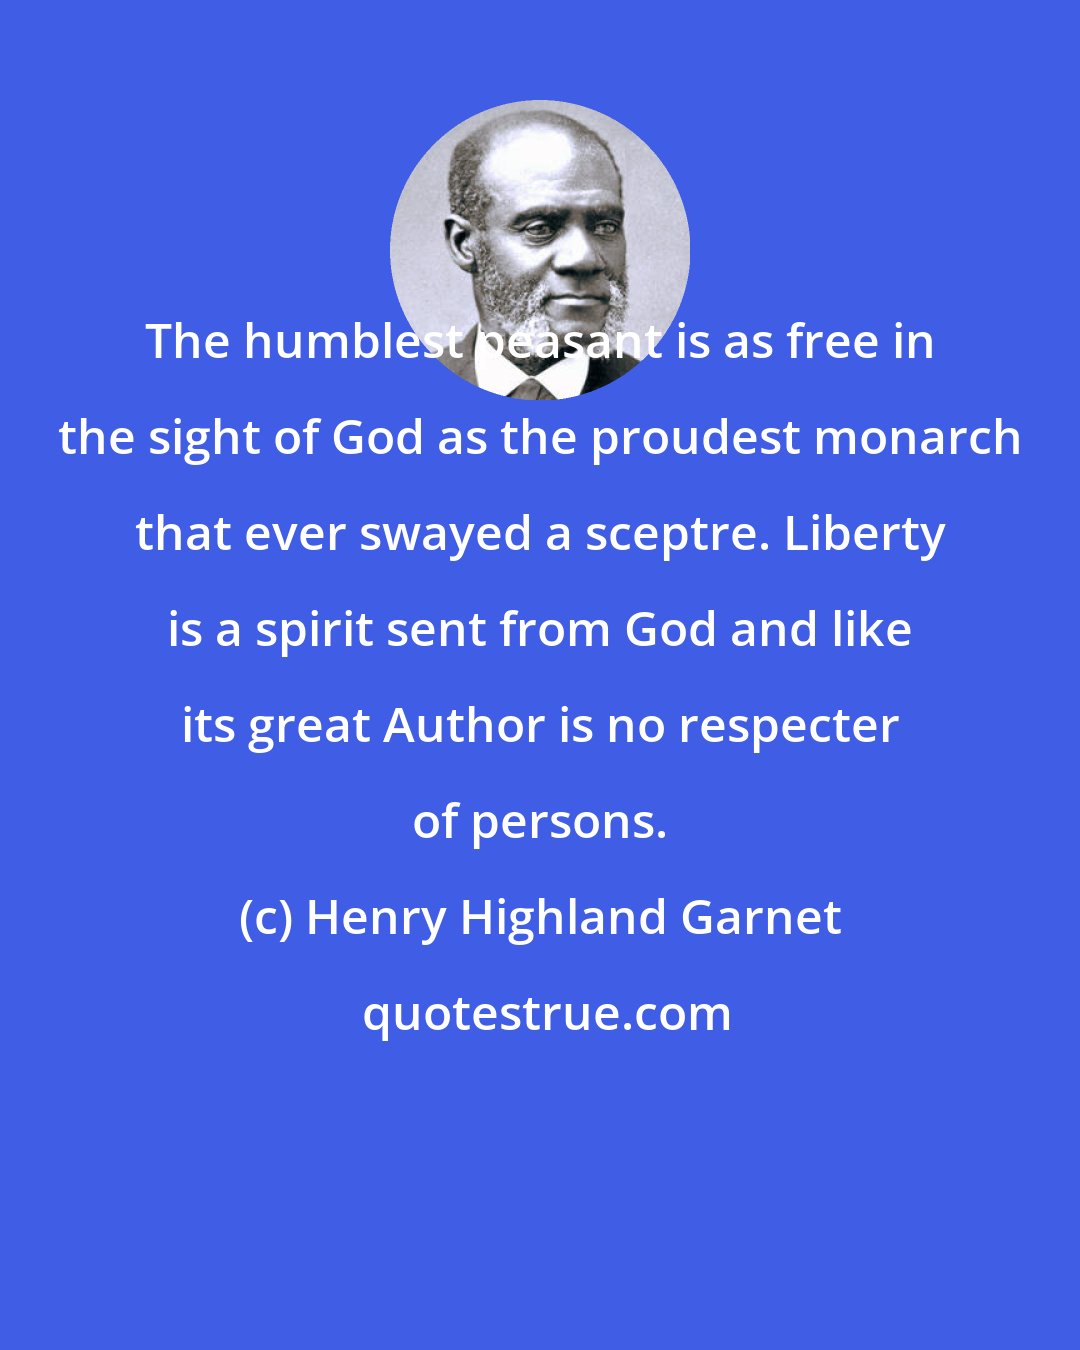 Henry Highland Garnet: The humblest peasant is as free in the sight of God as the proudest monarch that ever swayed a sceptre. Liberty is a spirit sent from God and like its great Author is no respecter of persons.